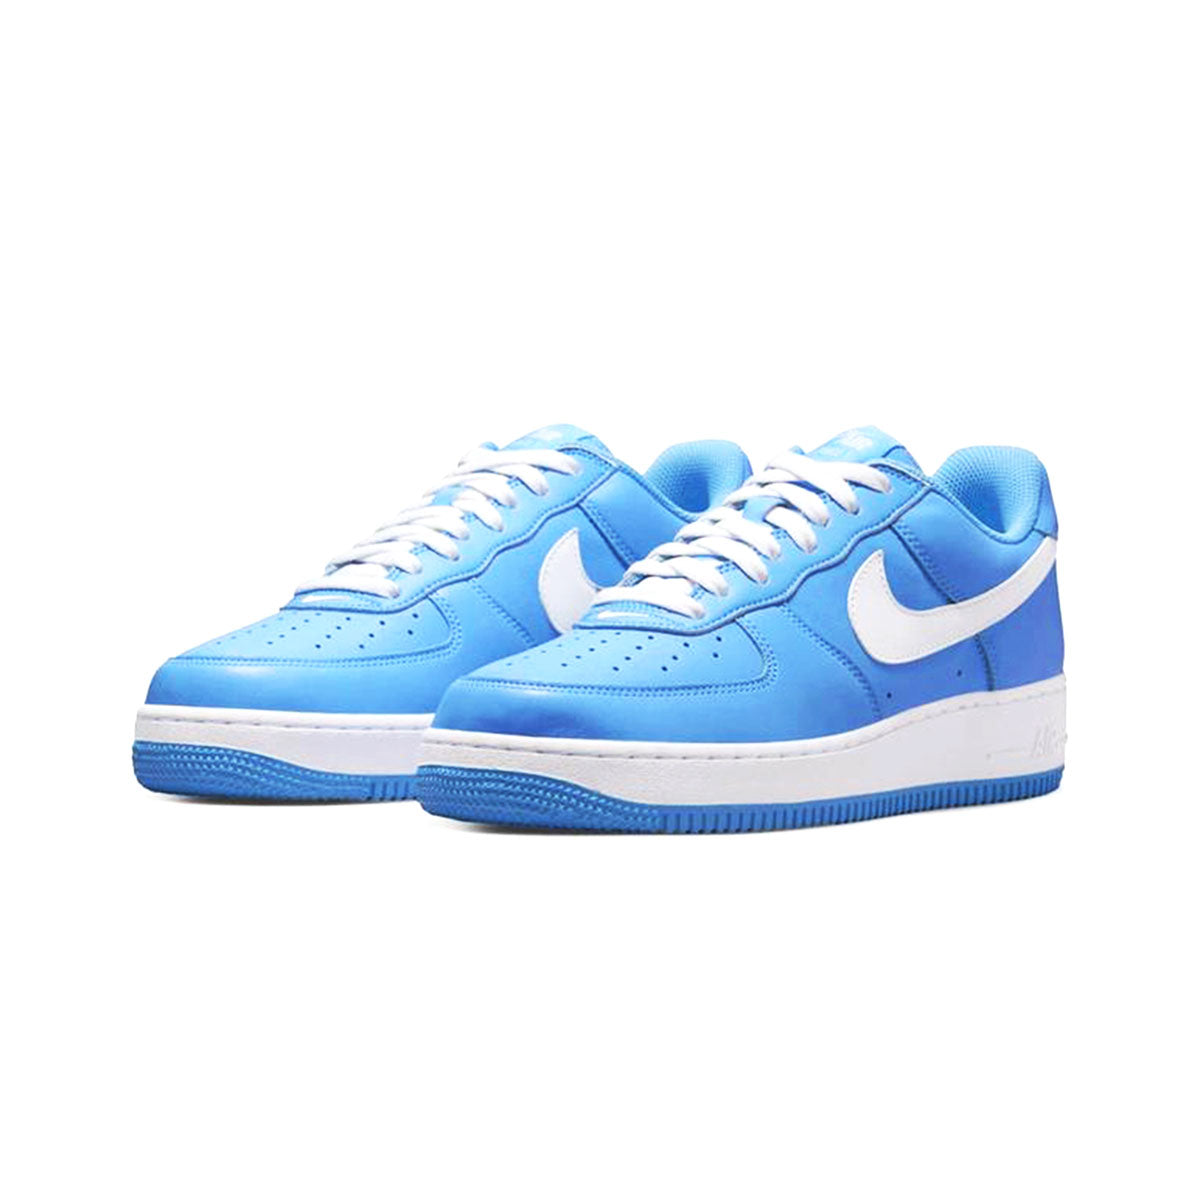 NIKE AIR FORCE 1 LOW RETRO "COLOR OF THE MONTH - UNIVERSITY BLUE" Nike Air Force 1 Low Retro "COLOR OF THE MONTH - UNIVERSITY BLUE" [DM0576-400]